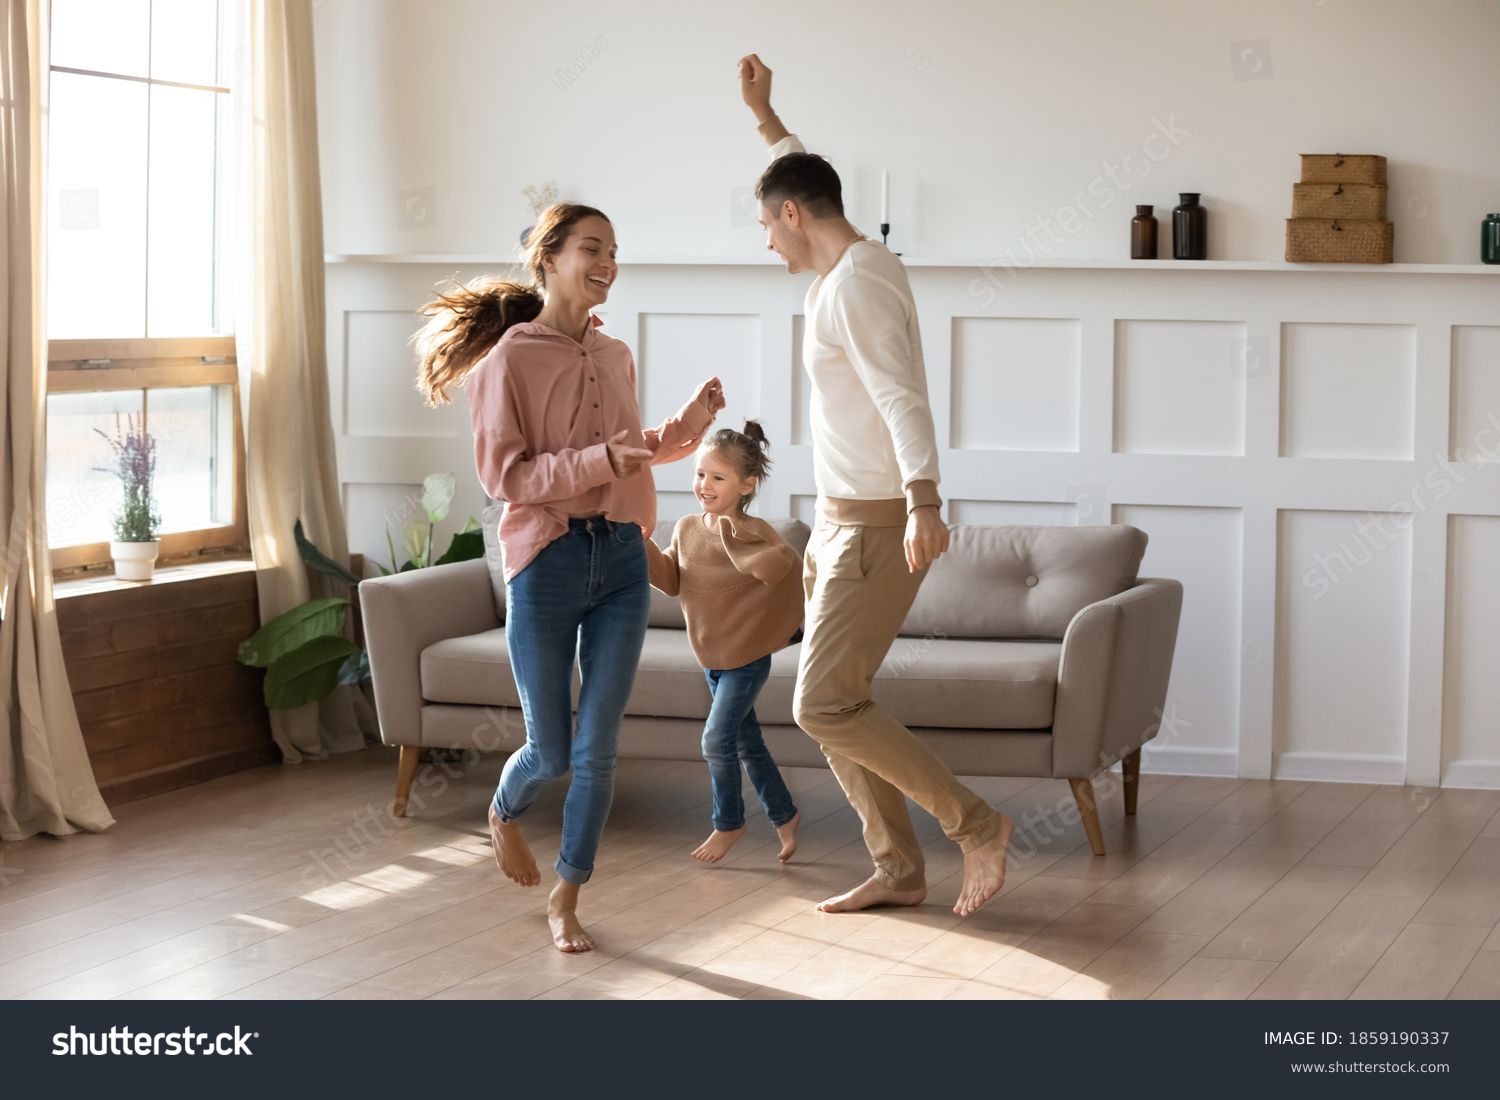 Cheery couple dancing with little daughter barefoot on wooden laminate floor with underfloor heating system in modern warm living room. New home, bank loan and lending, hobby and fun with kids concept #1859190337